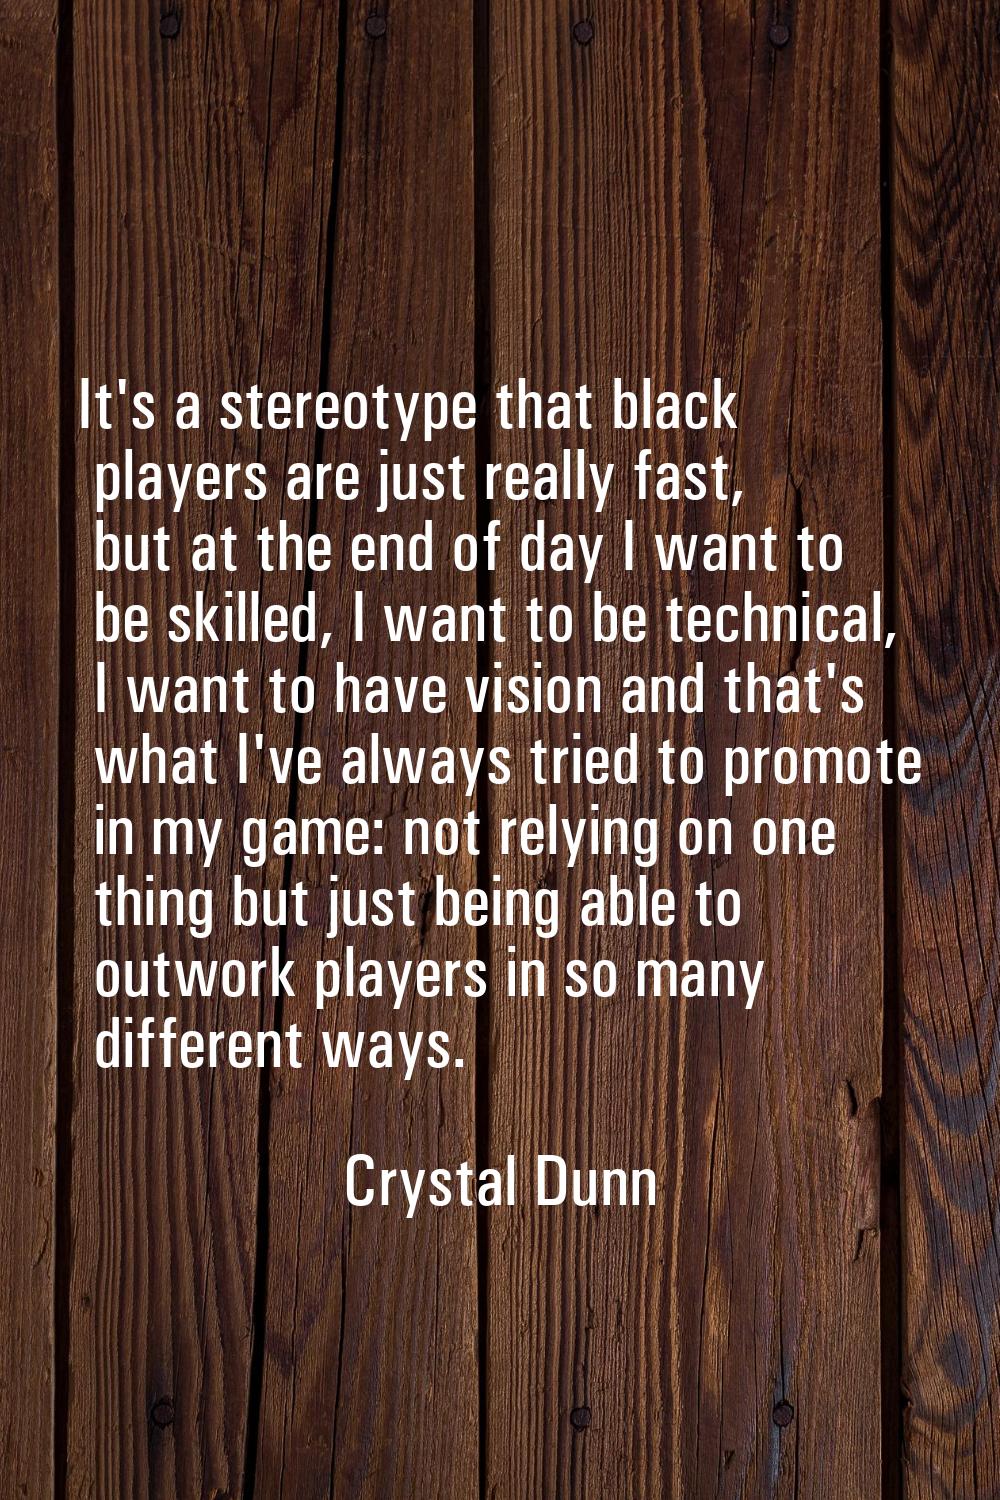 It's a stereotype that black players are just really fast, but at the end of day I want to be skill